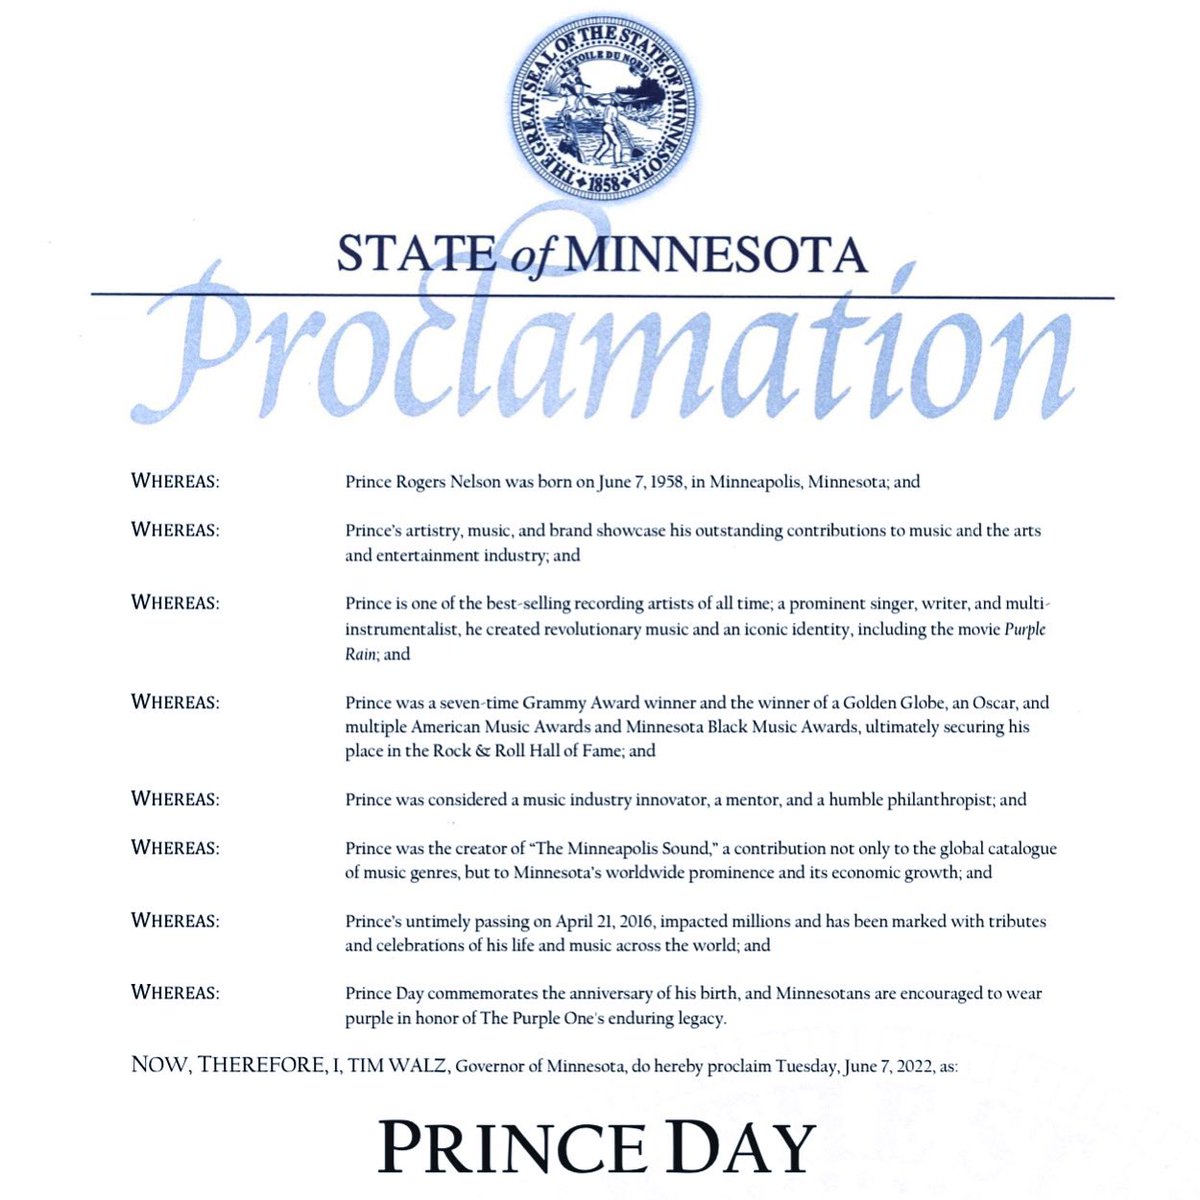 The State of Minnesota proclaimed today, June 7th, as Prince Day. Although Prince did not celebrate his birthday, we take this opportunity to recognize his artistry, influence and philanthropy. #PrinceDay